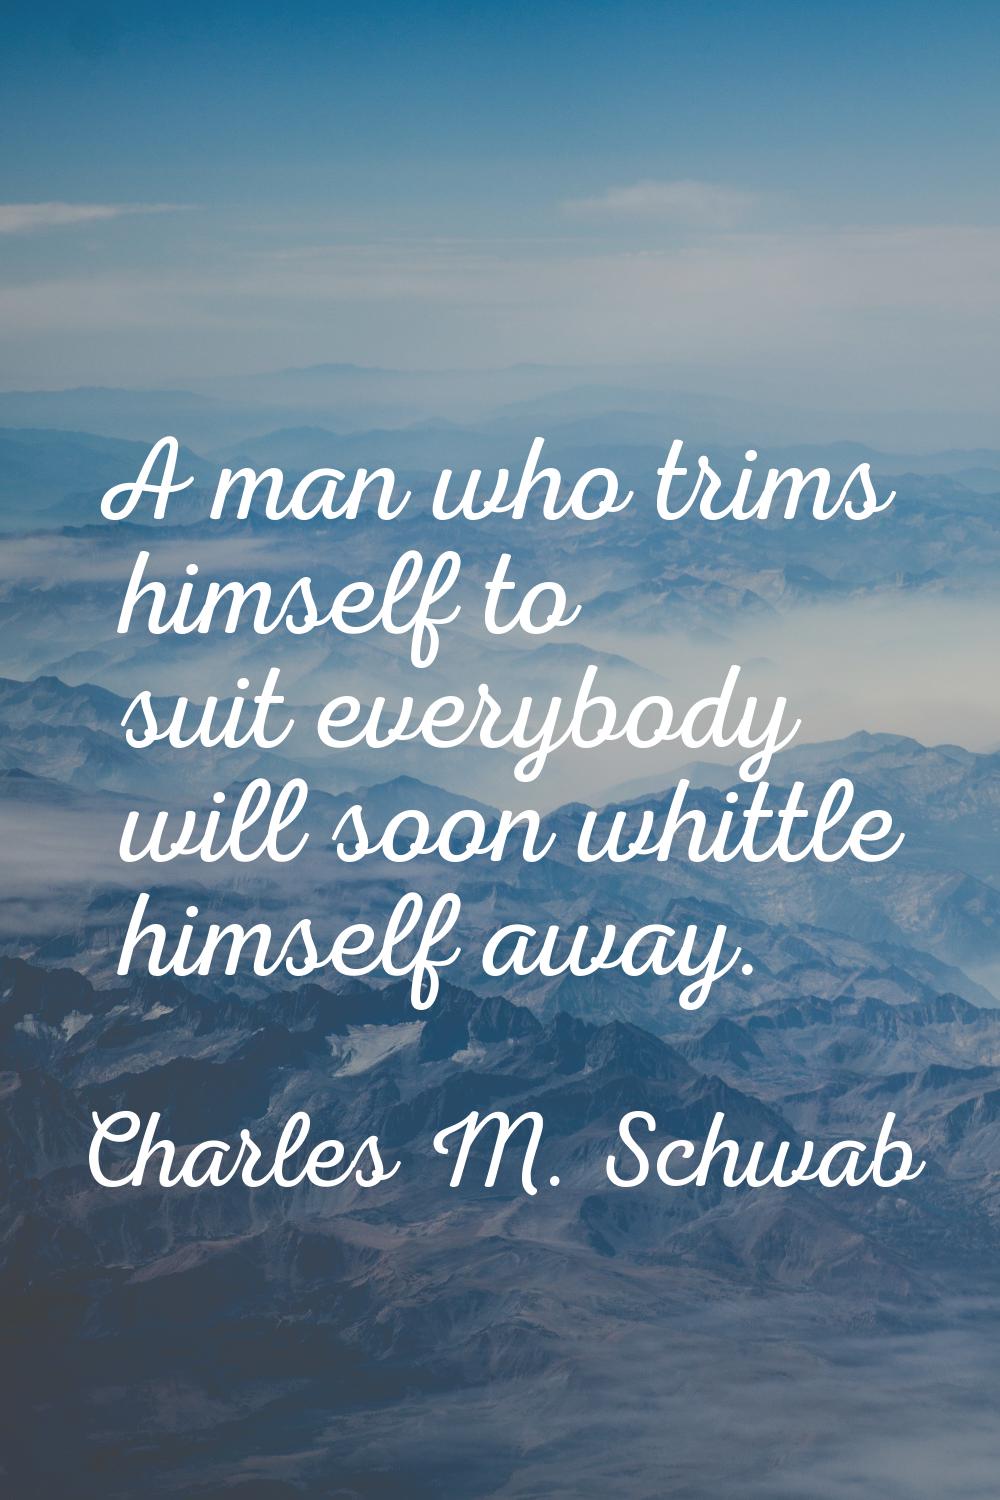 A man who trims himself to suit everybody will soon whittle himself away.